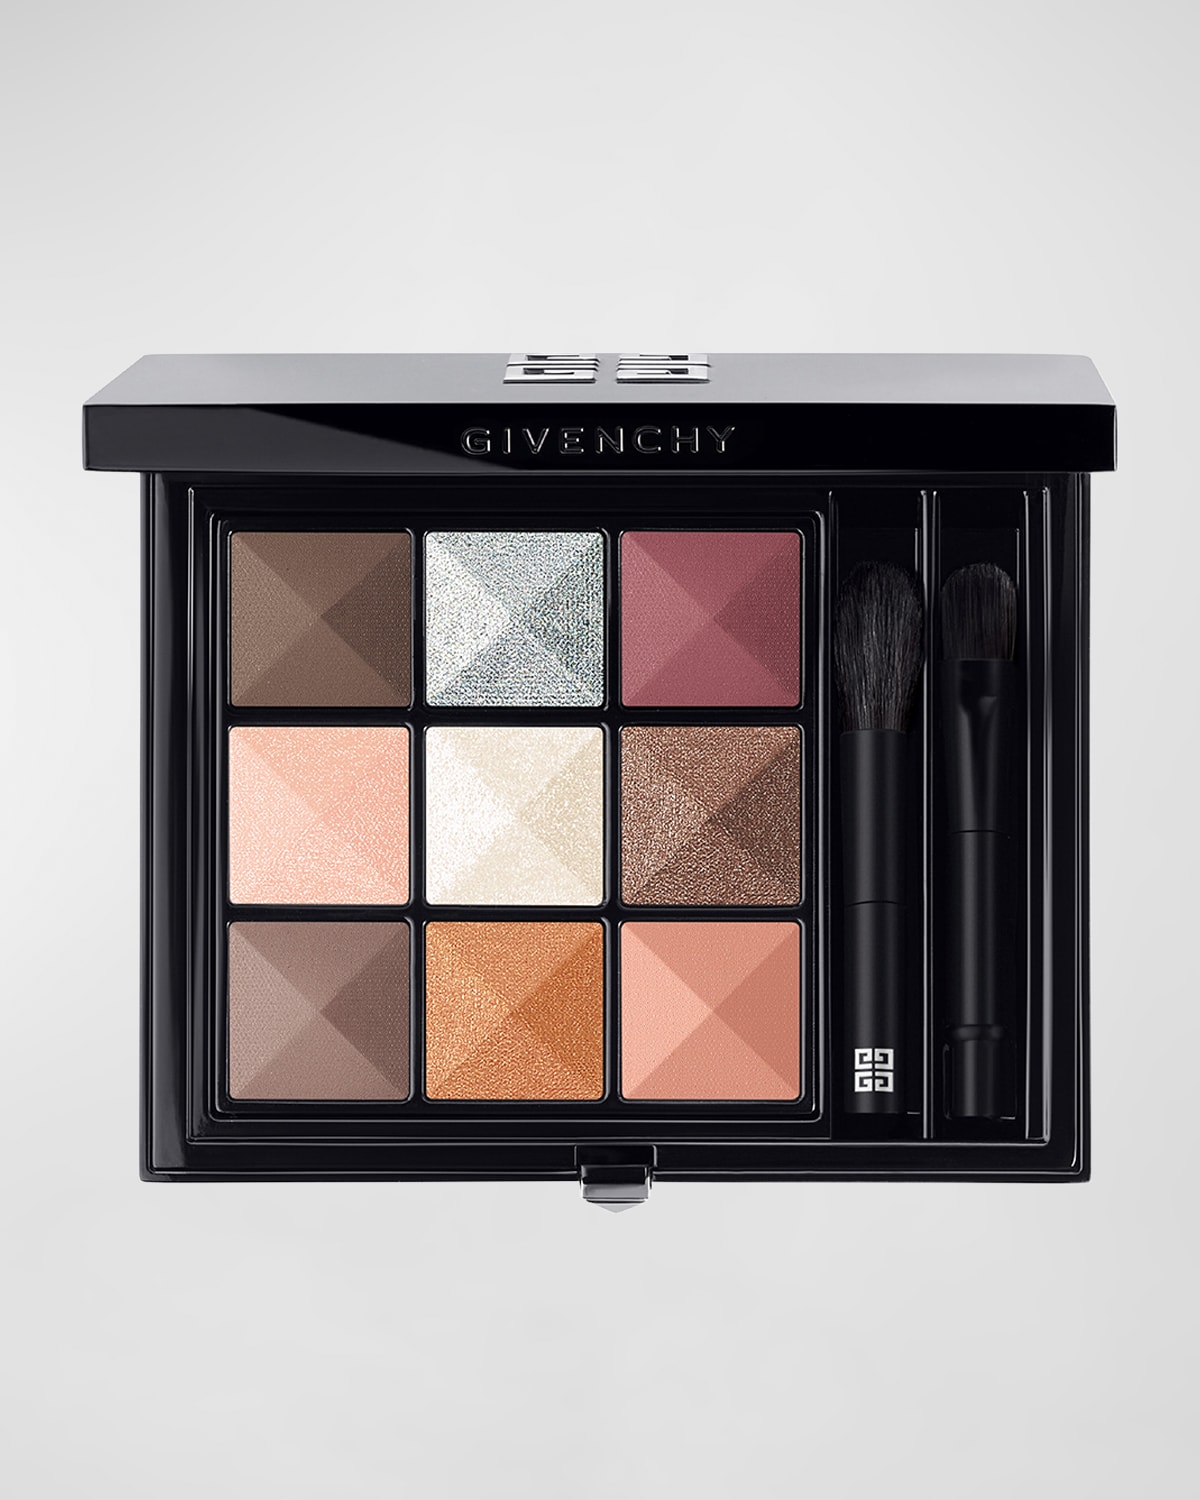 Givenchy Le 9 De  Multi-finish Eyeshadow Palette In White